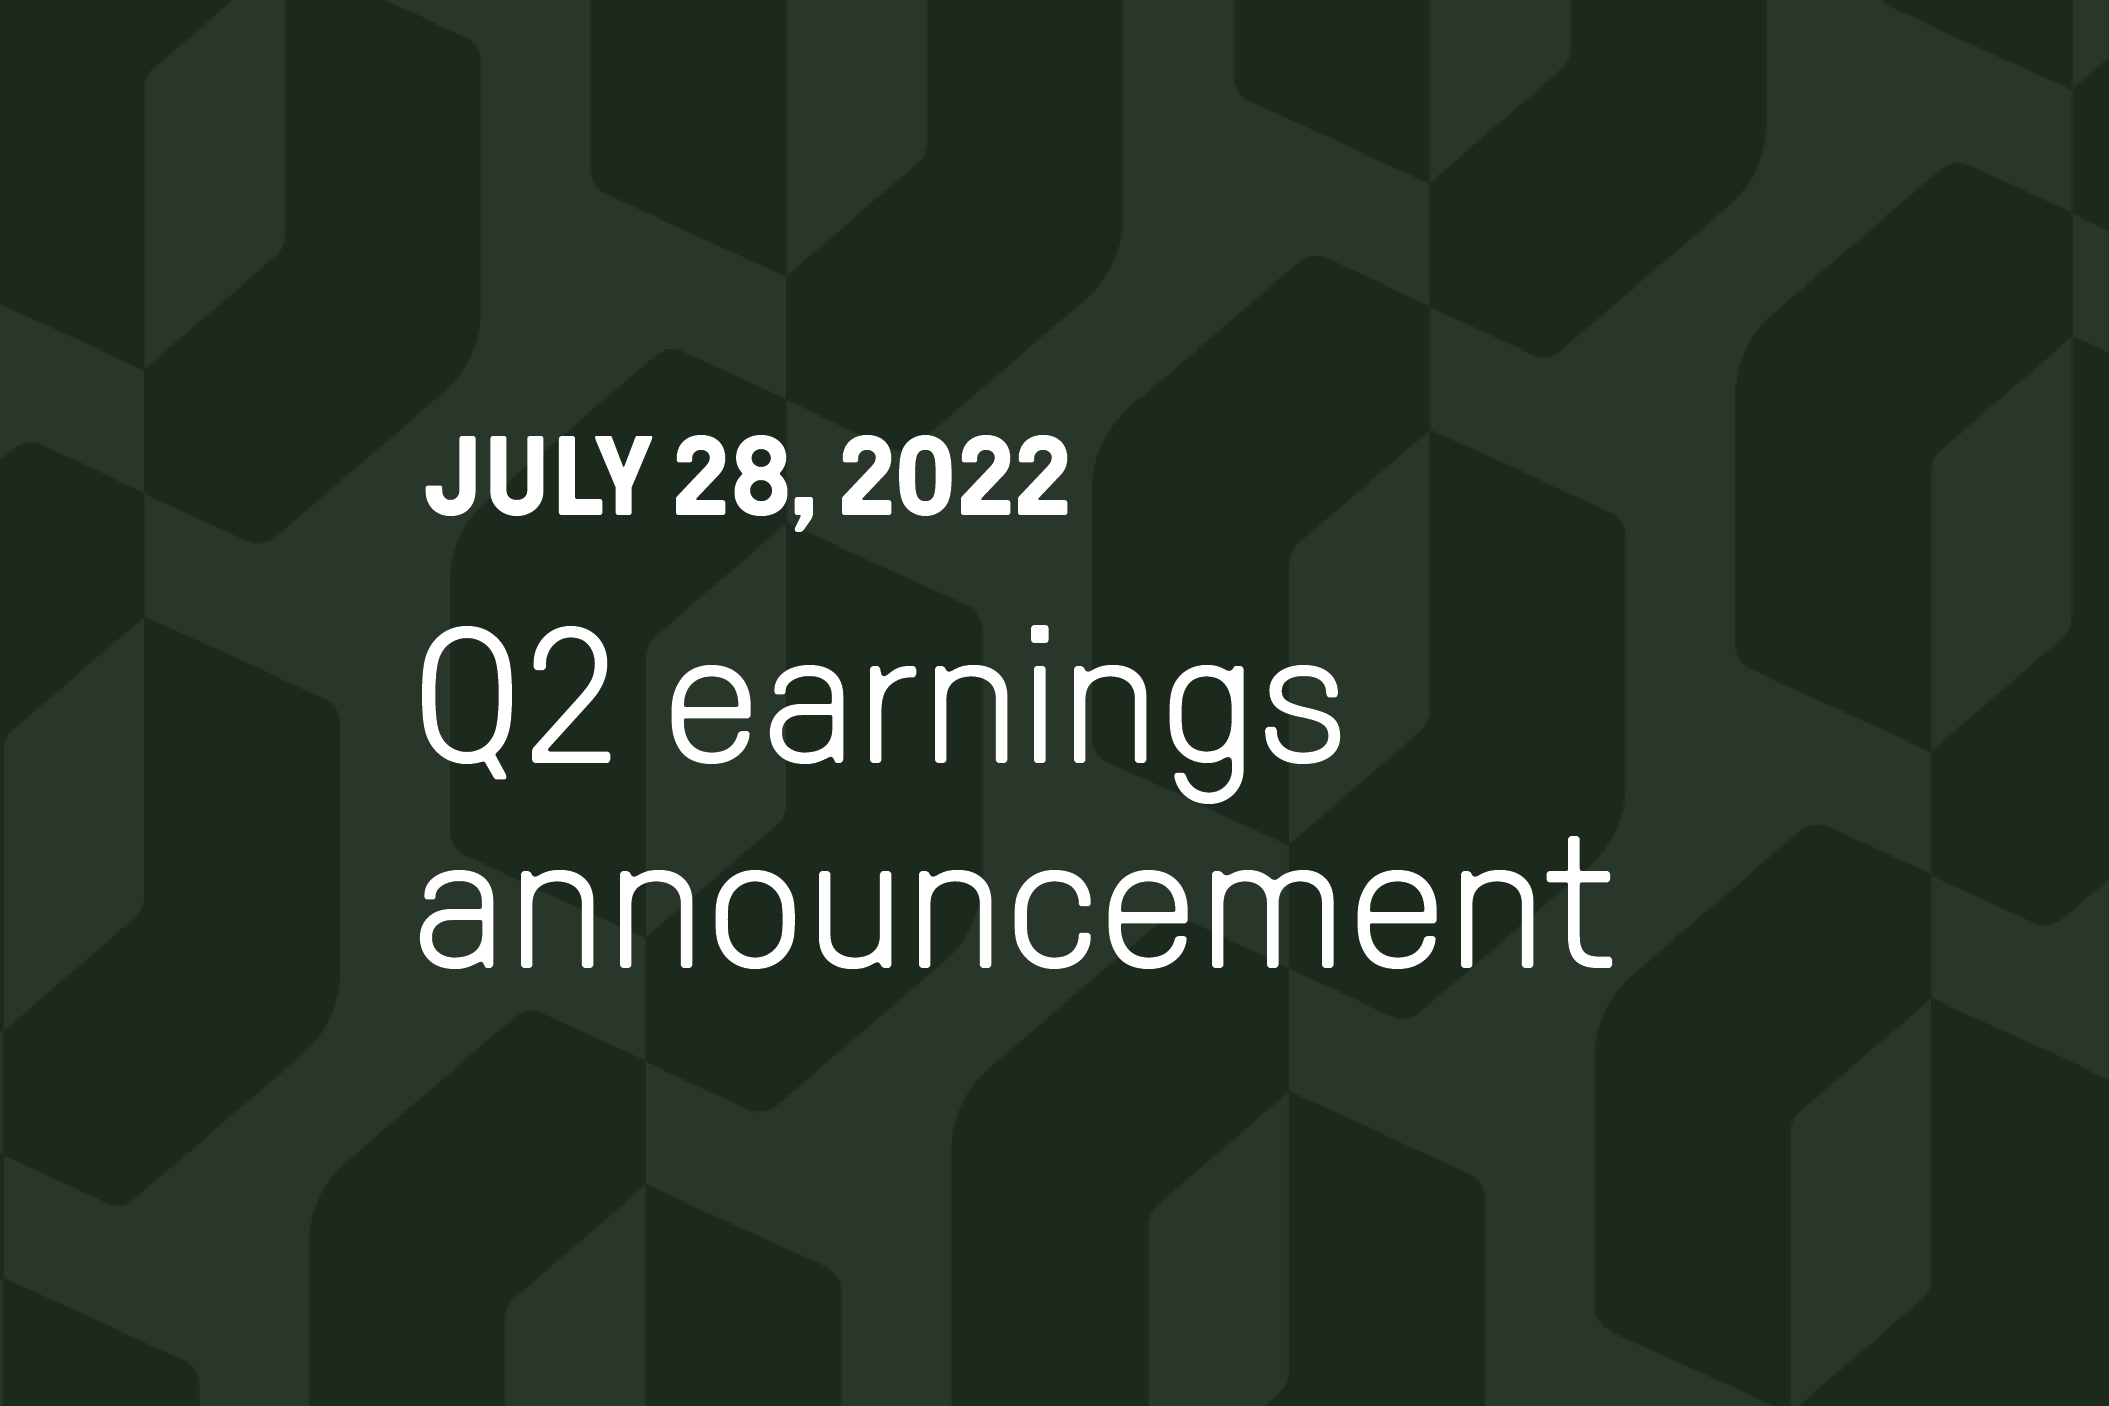 Green Oshkosh logo pattern background with white Oshkosh Corporation logo and white text that reads July 28, 2022 Q2 earnings announcement